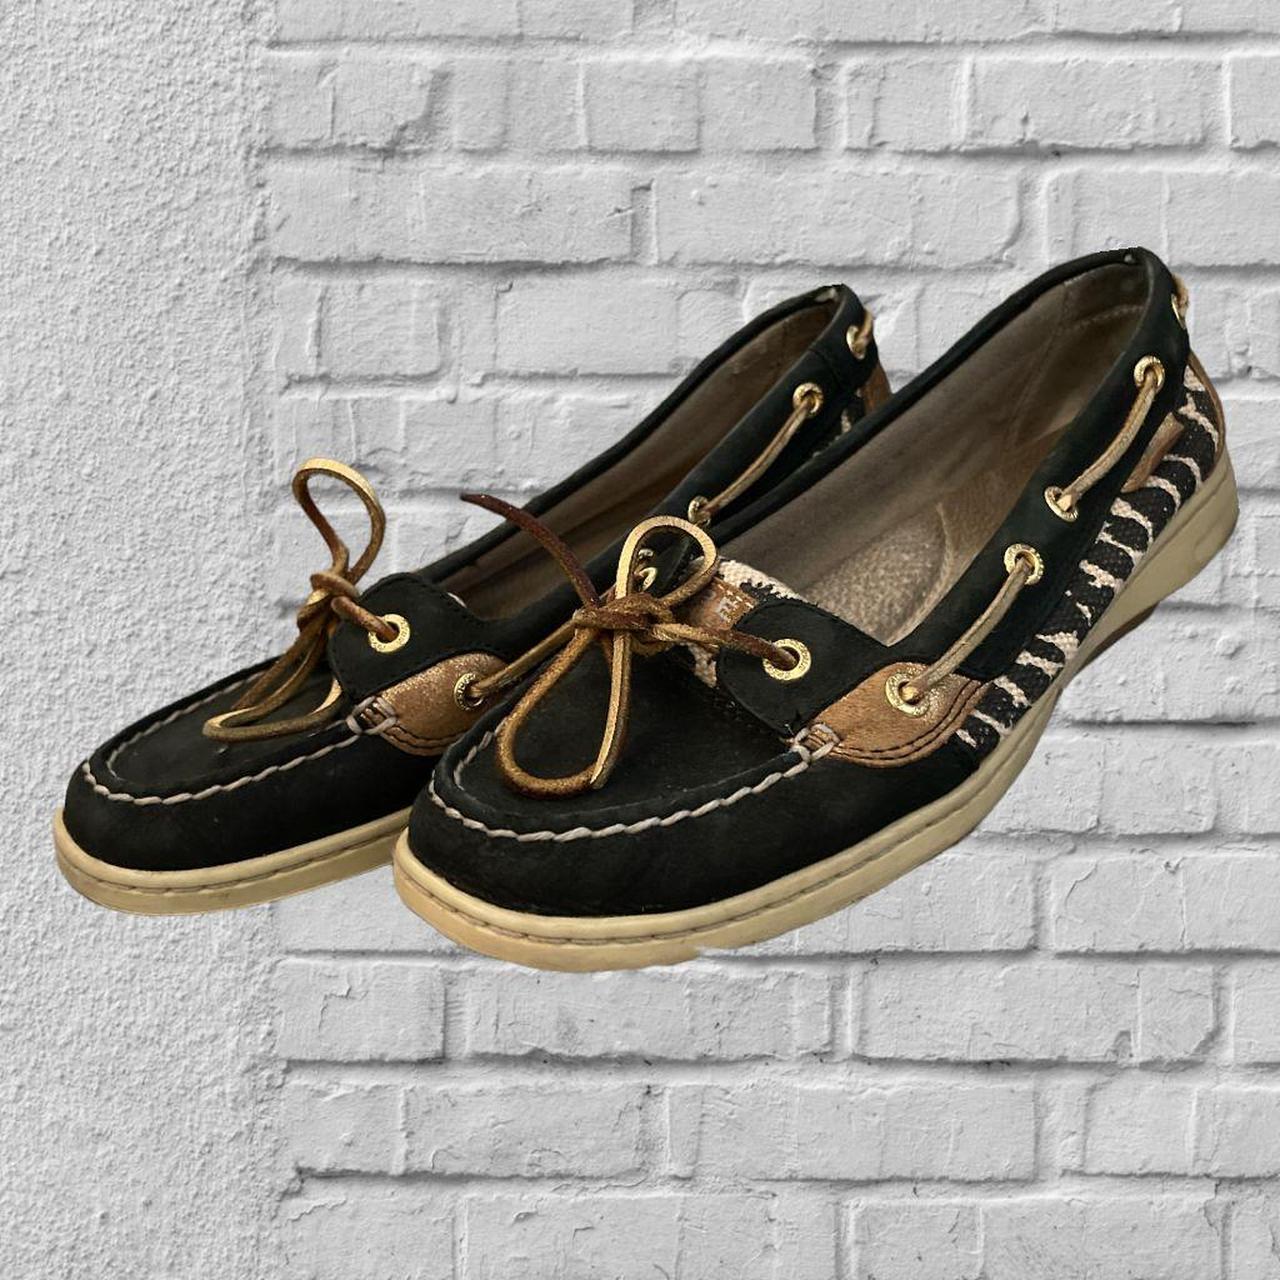 Sperry Women's Black and Gold Loafers